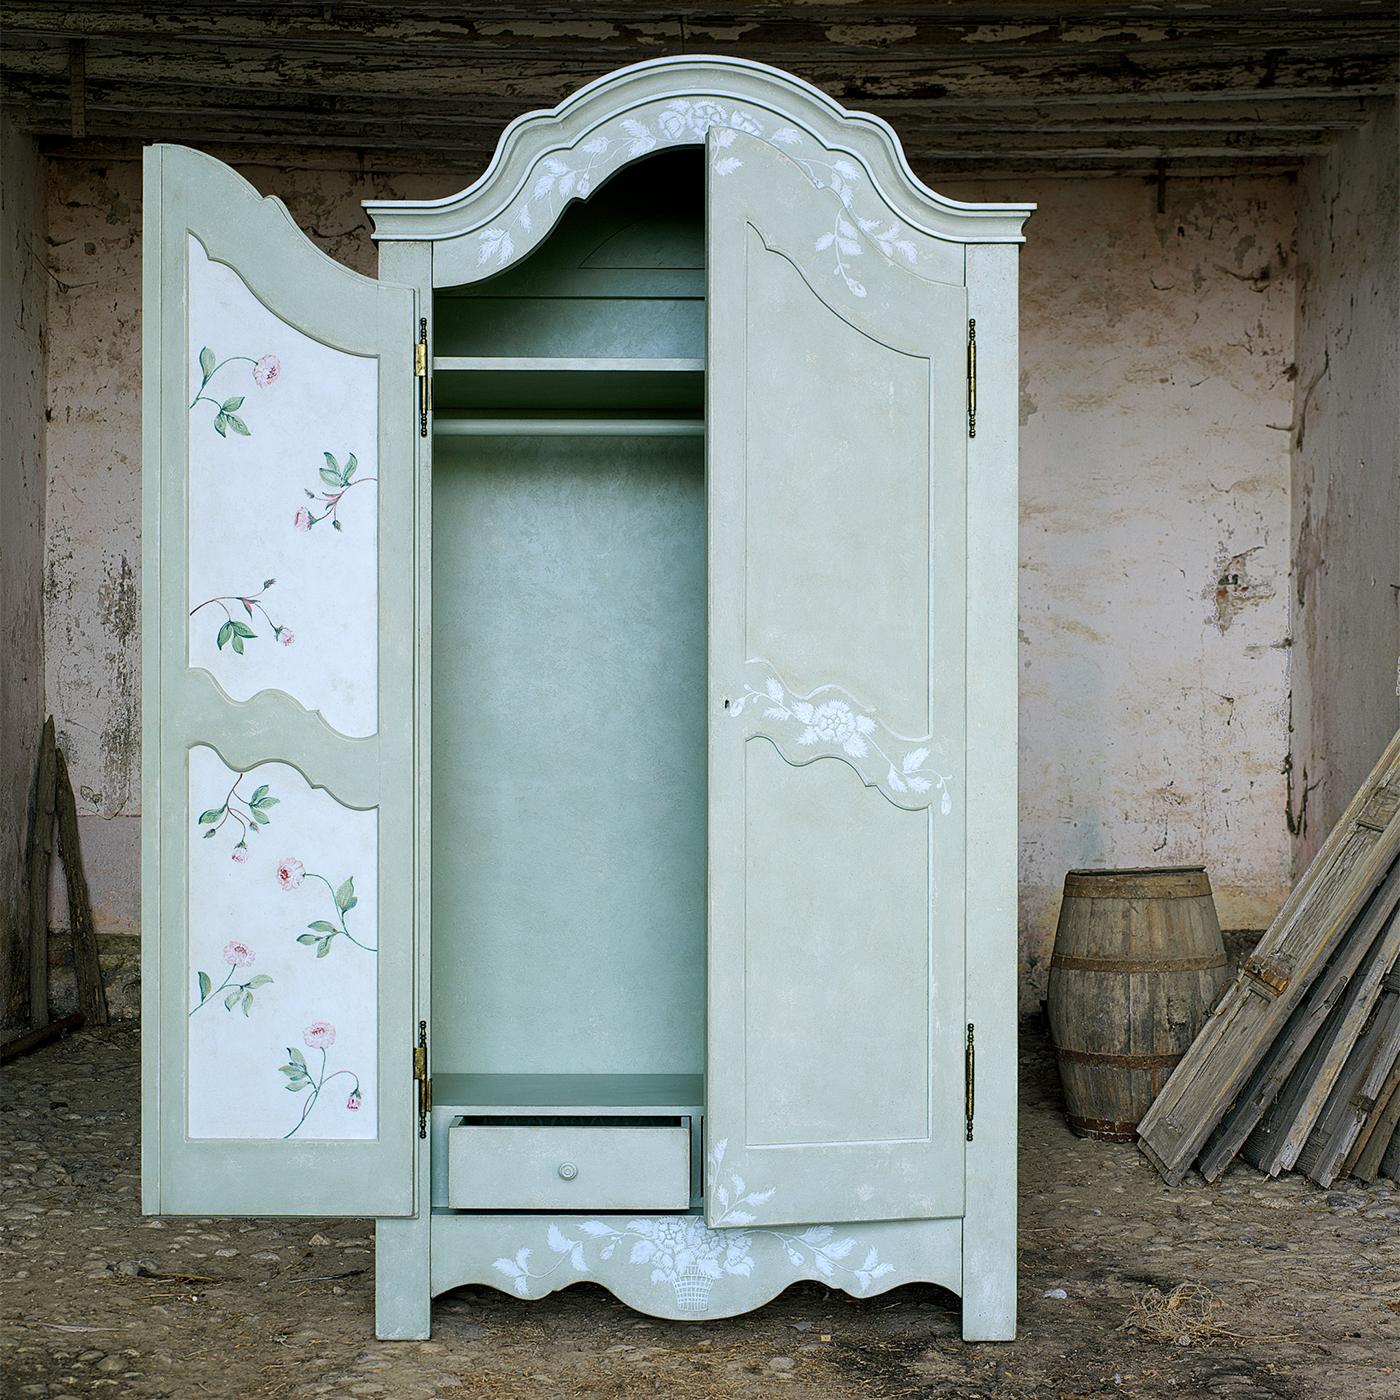 Introducing the Mantegna Armoire, a stunning piece that combines style and functionality. Hand-painted in blue with textural white flowers on the edges, it features contrasting white interiors adorned with colorful flowers. Inspired by the attention